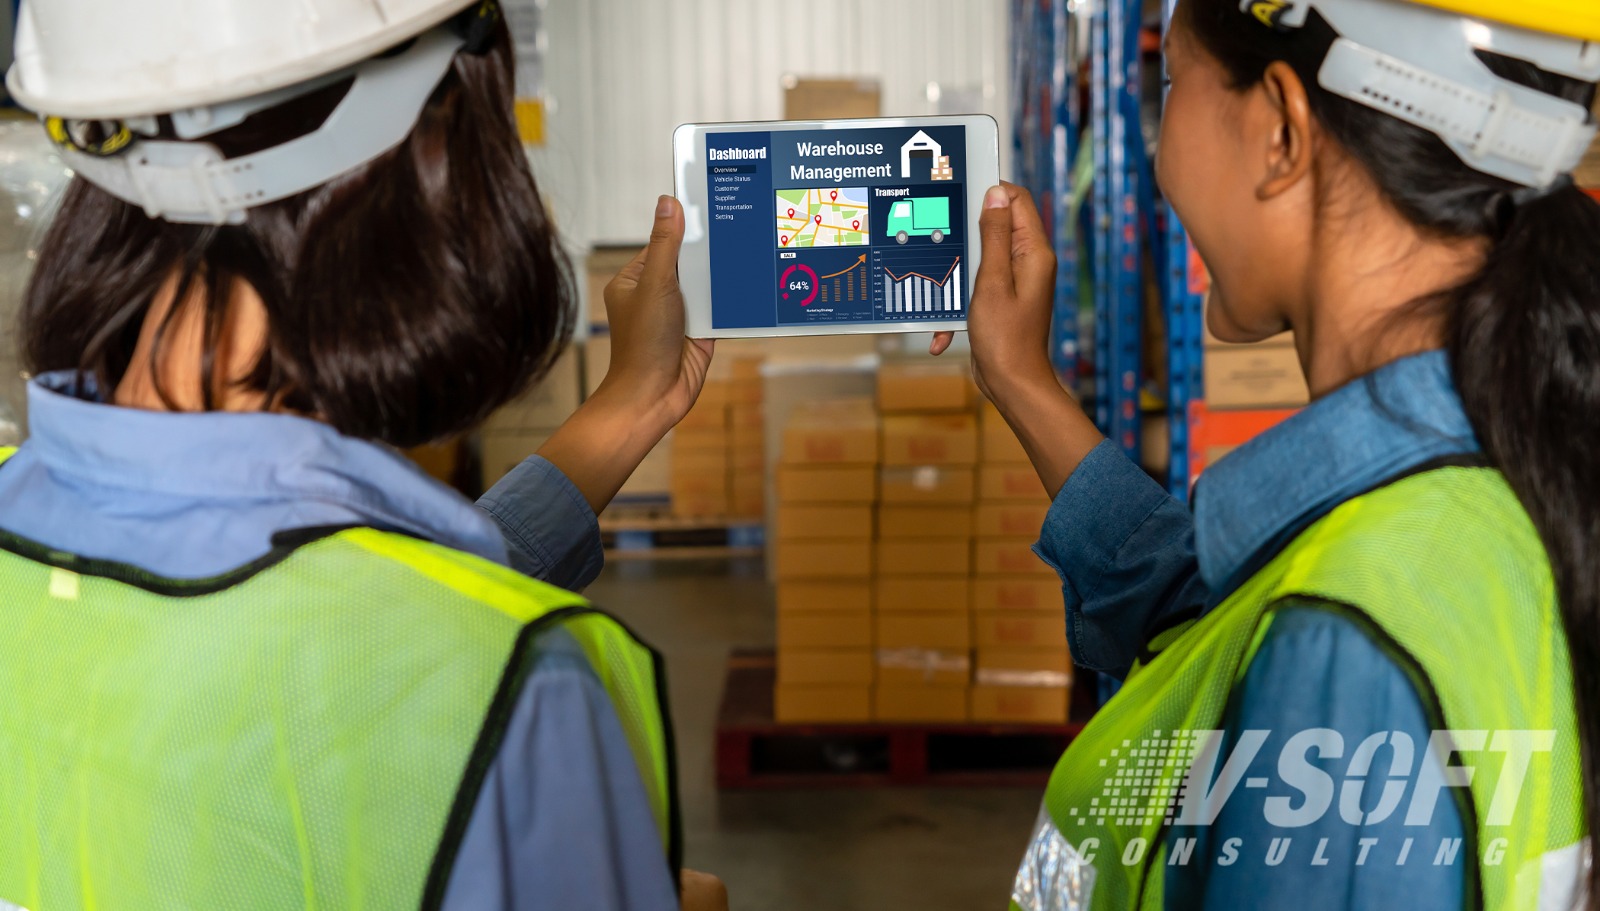 RPA can streamline inventory management by allowing retailers to monitor real-time data and analytics about inventory operations.